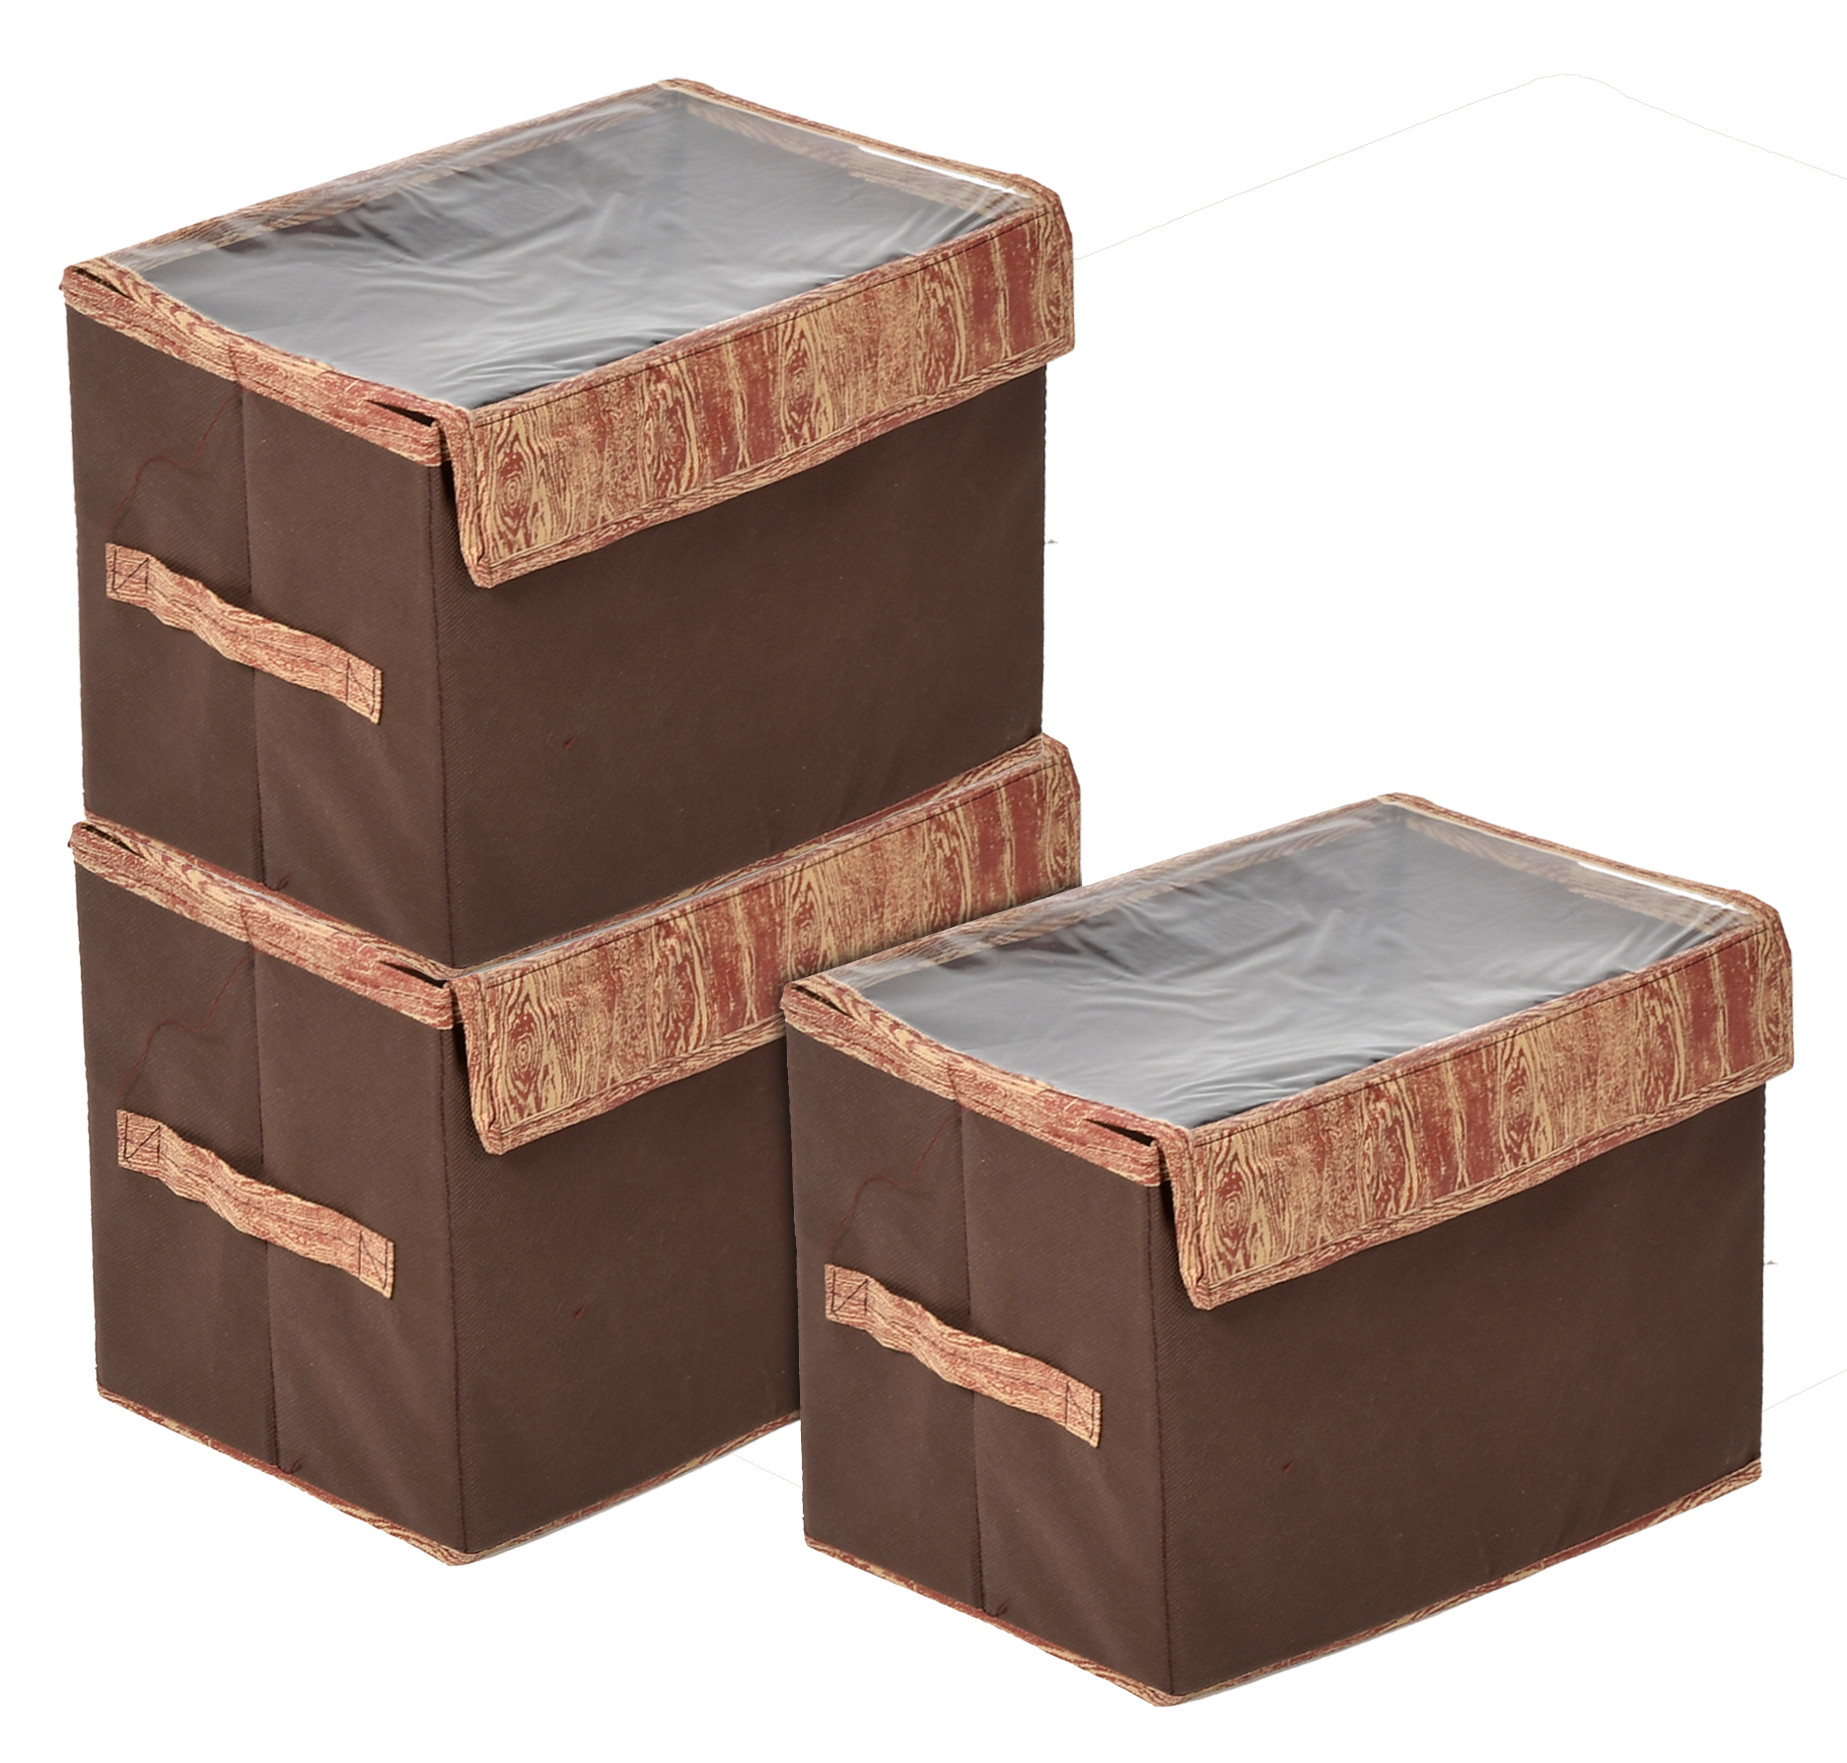 Kuber Industries Wooden Design Multiuses Large Non-Woven Storage Box/Organizer With Tranasparent Lid (Brown) -44KM0441